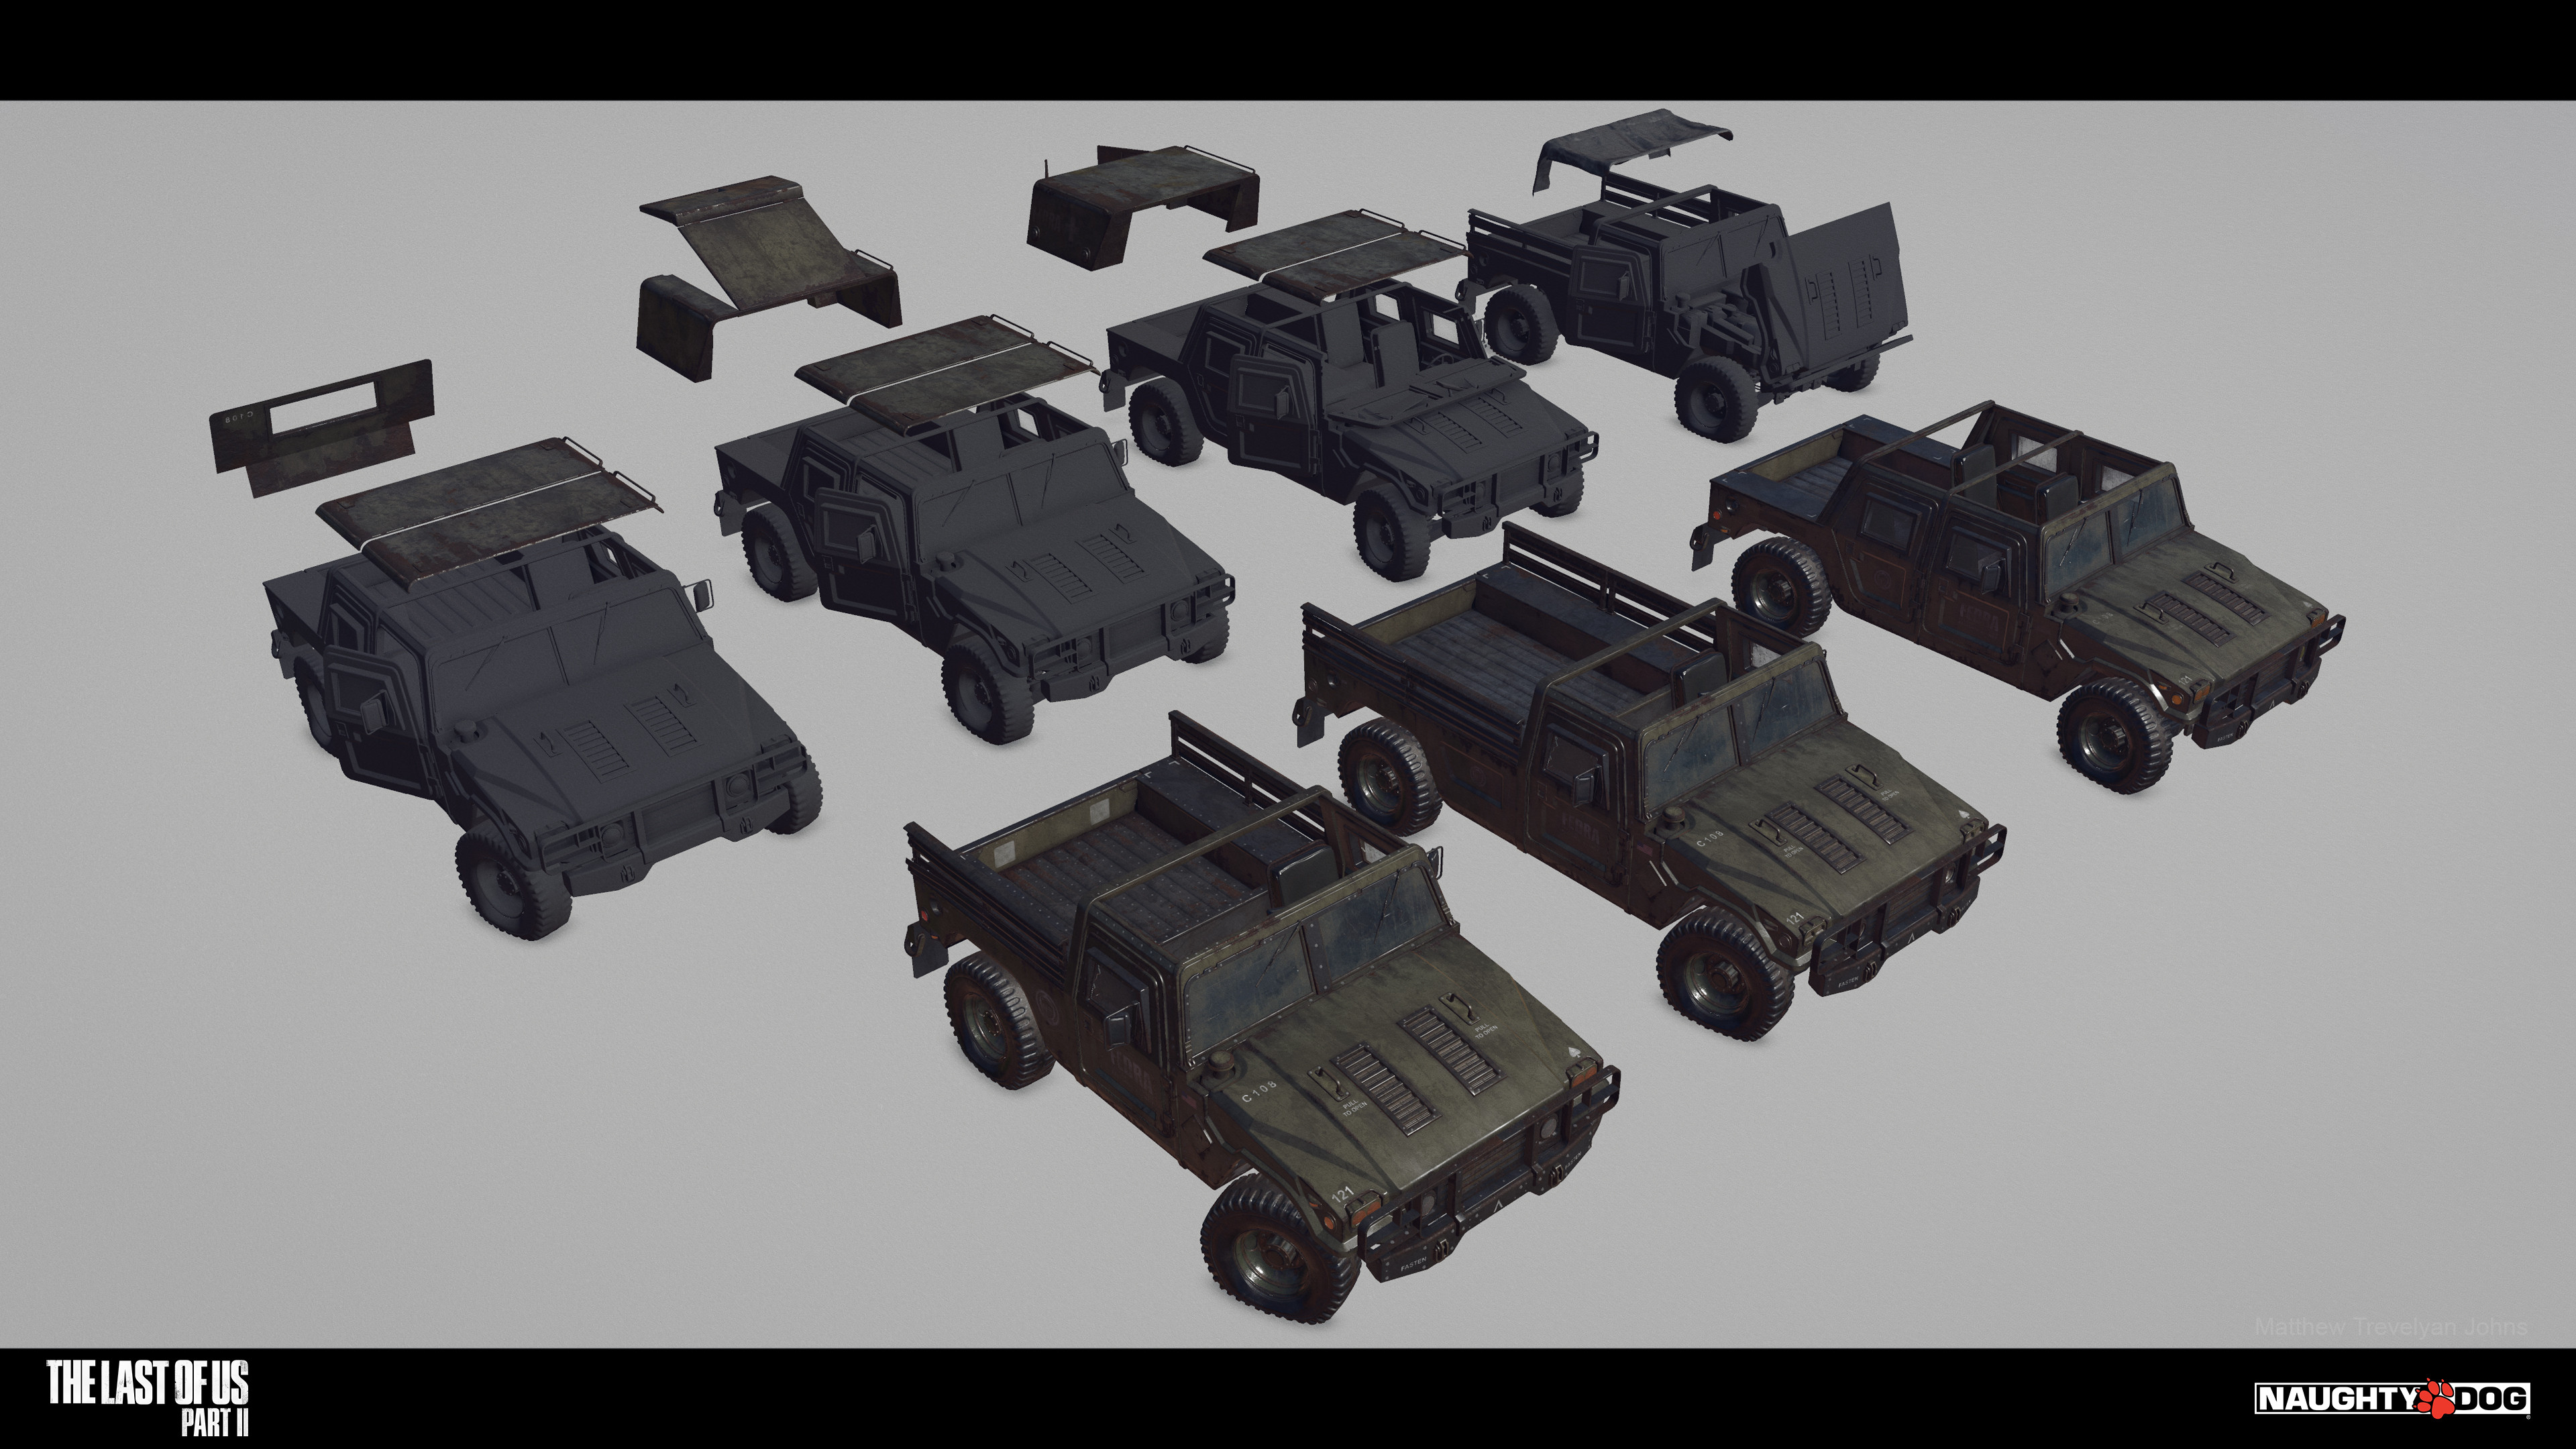 Here's an example, in the front we have 3 truck-bed variations attached to the same front end of the vehicle to create different looks. And in the back, we see an assortment of attachments that could create even more variations of the same vehicle